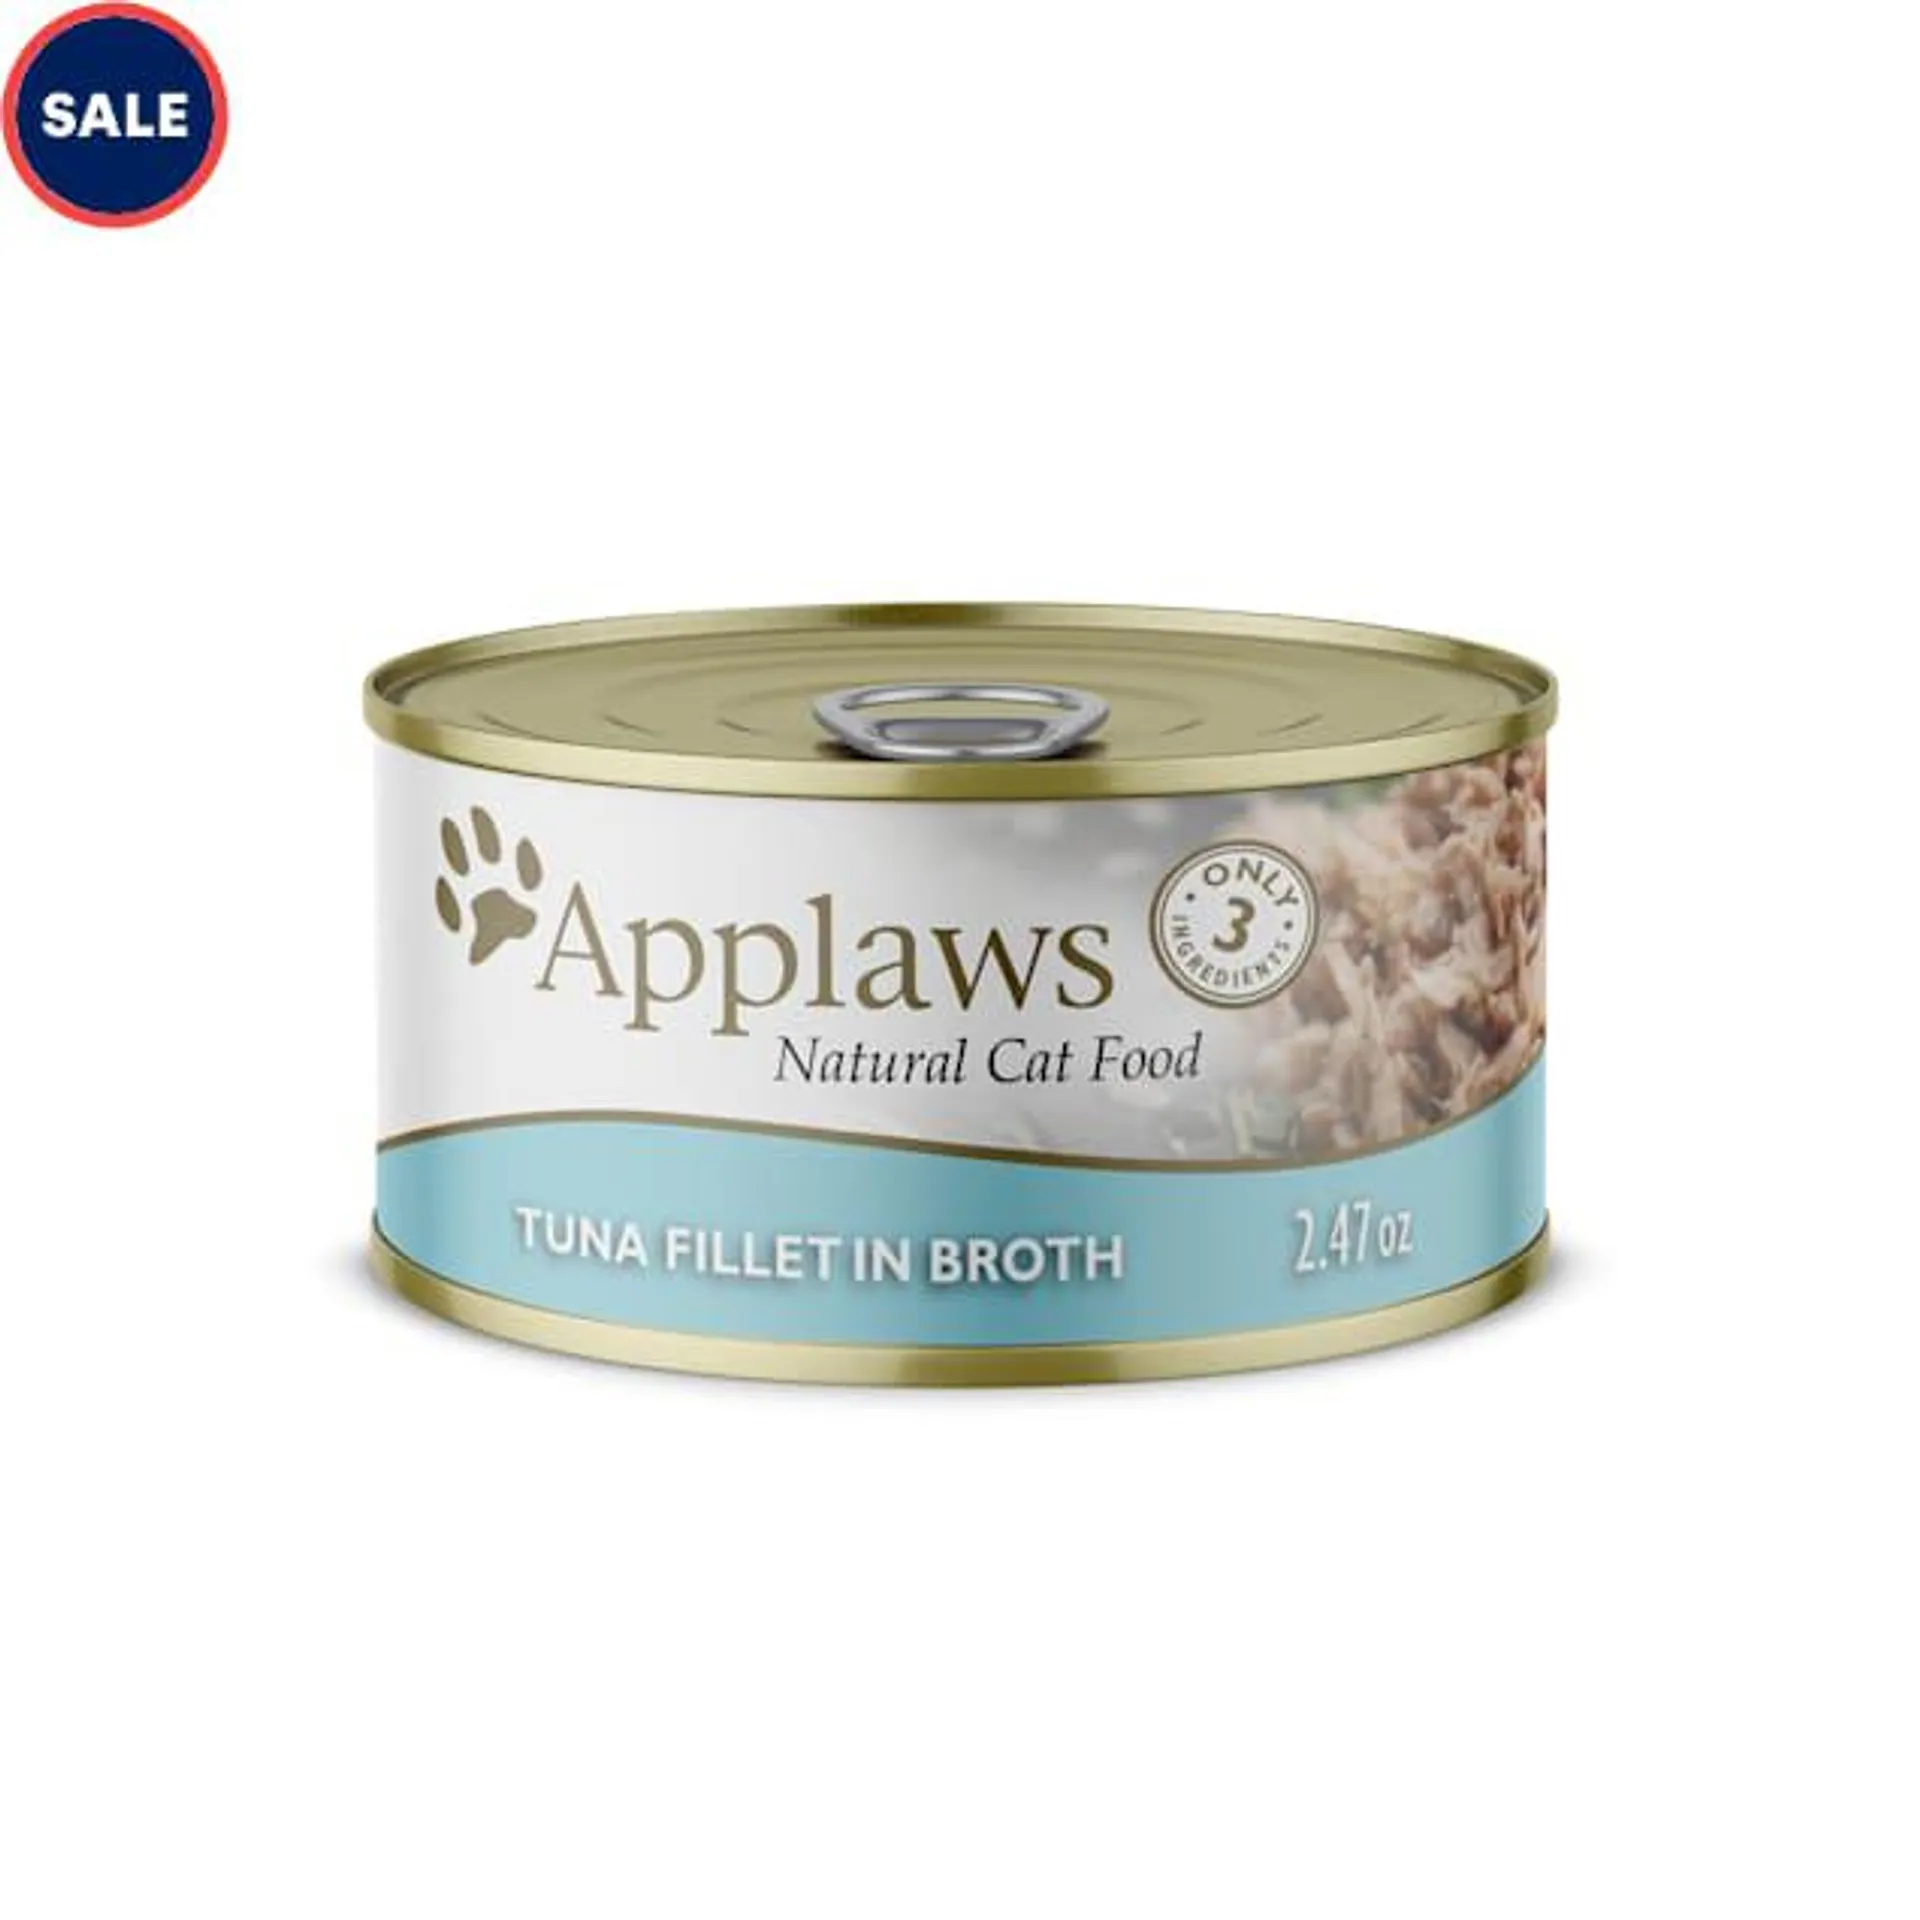 Applaws Natural Tuna Fillet in Broth Wet Cat Food, 2.47 oz., Case of 24